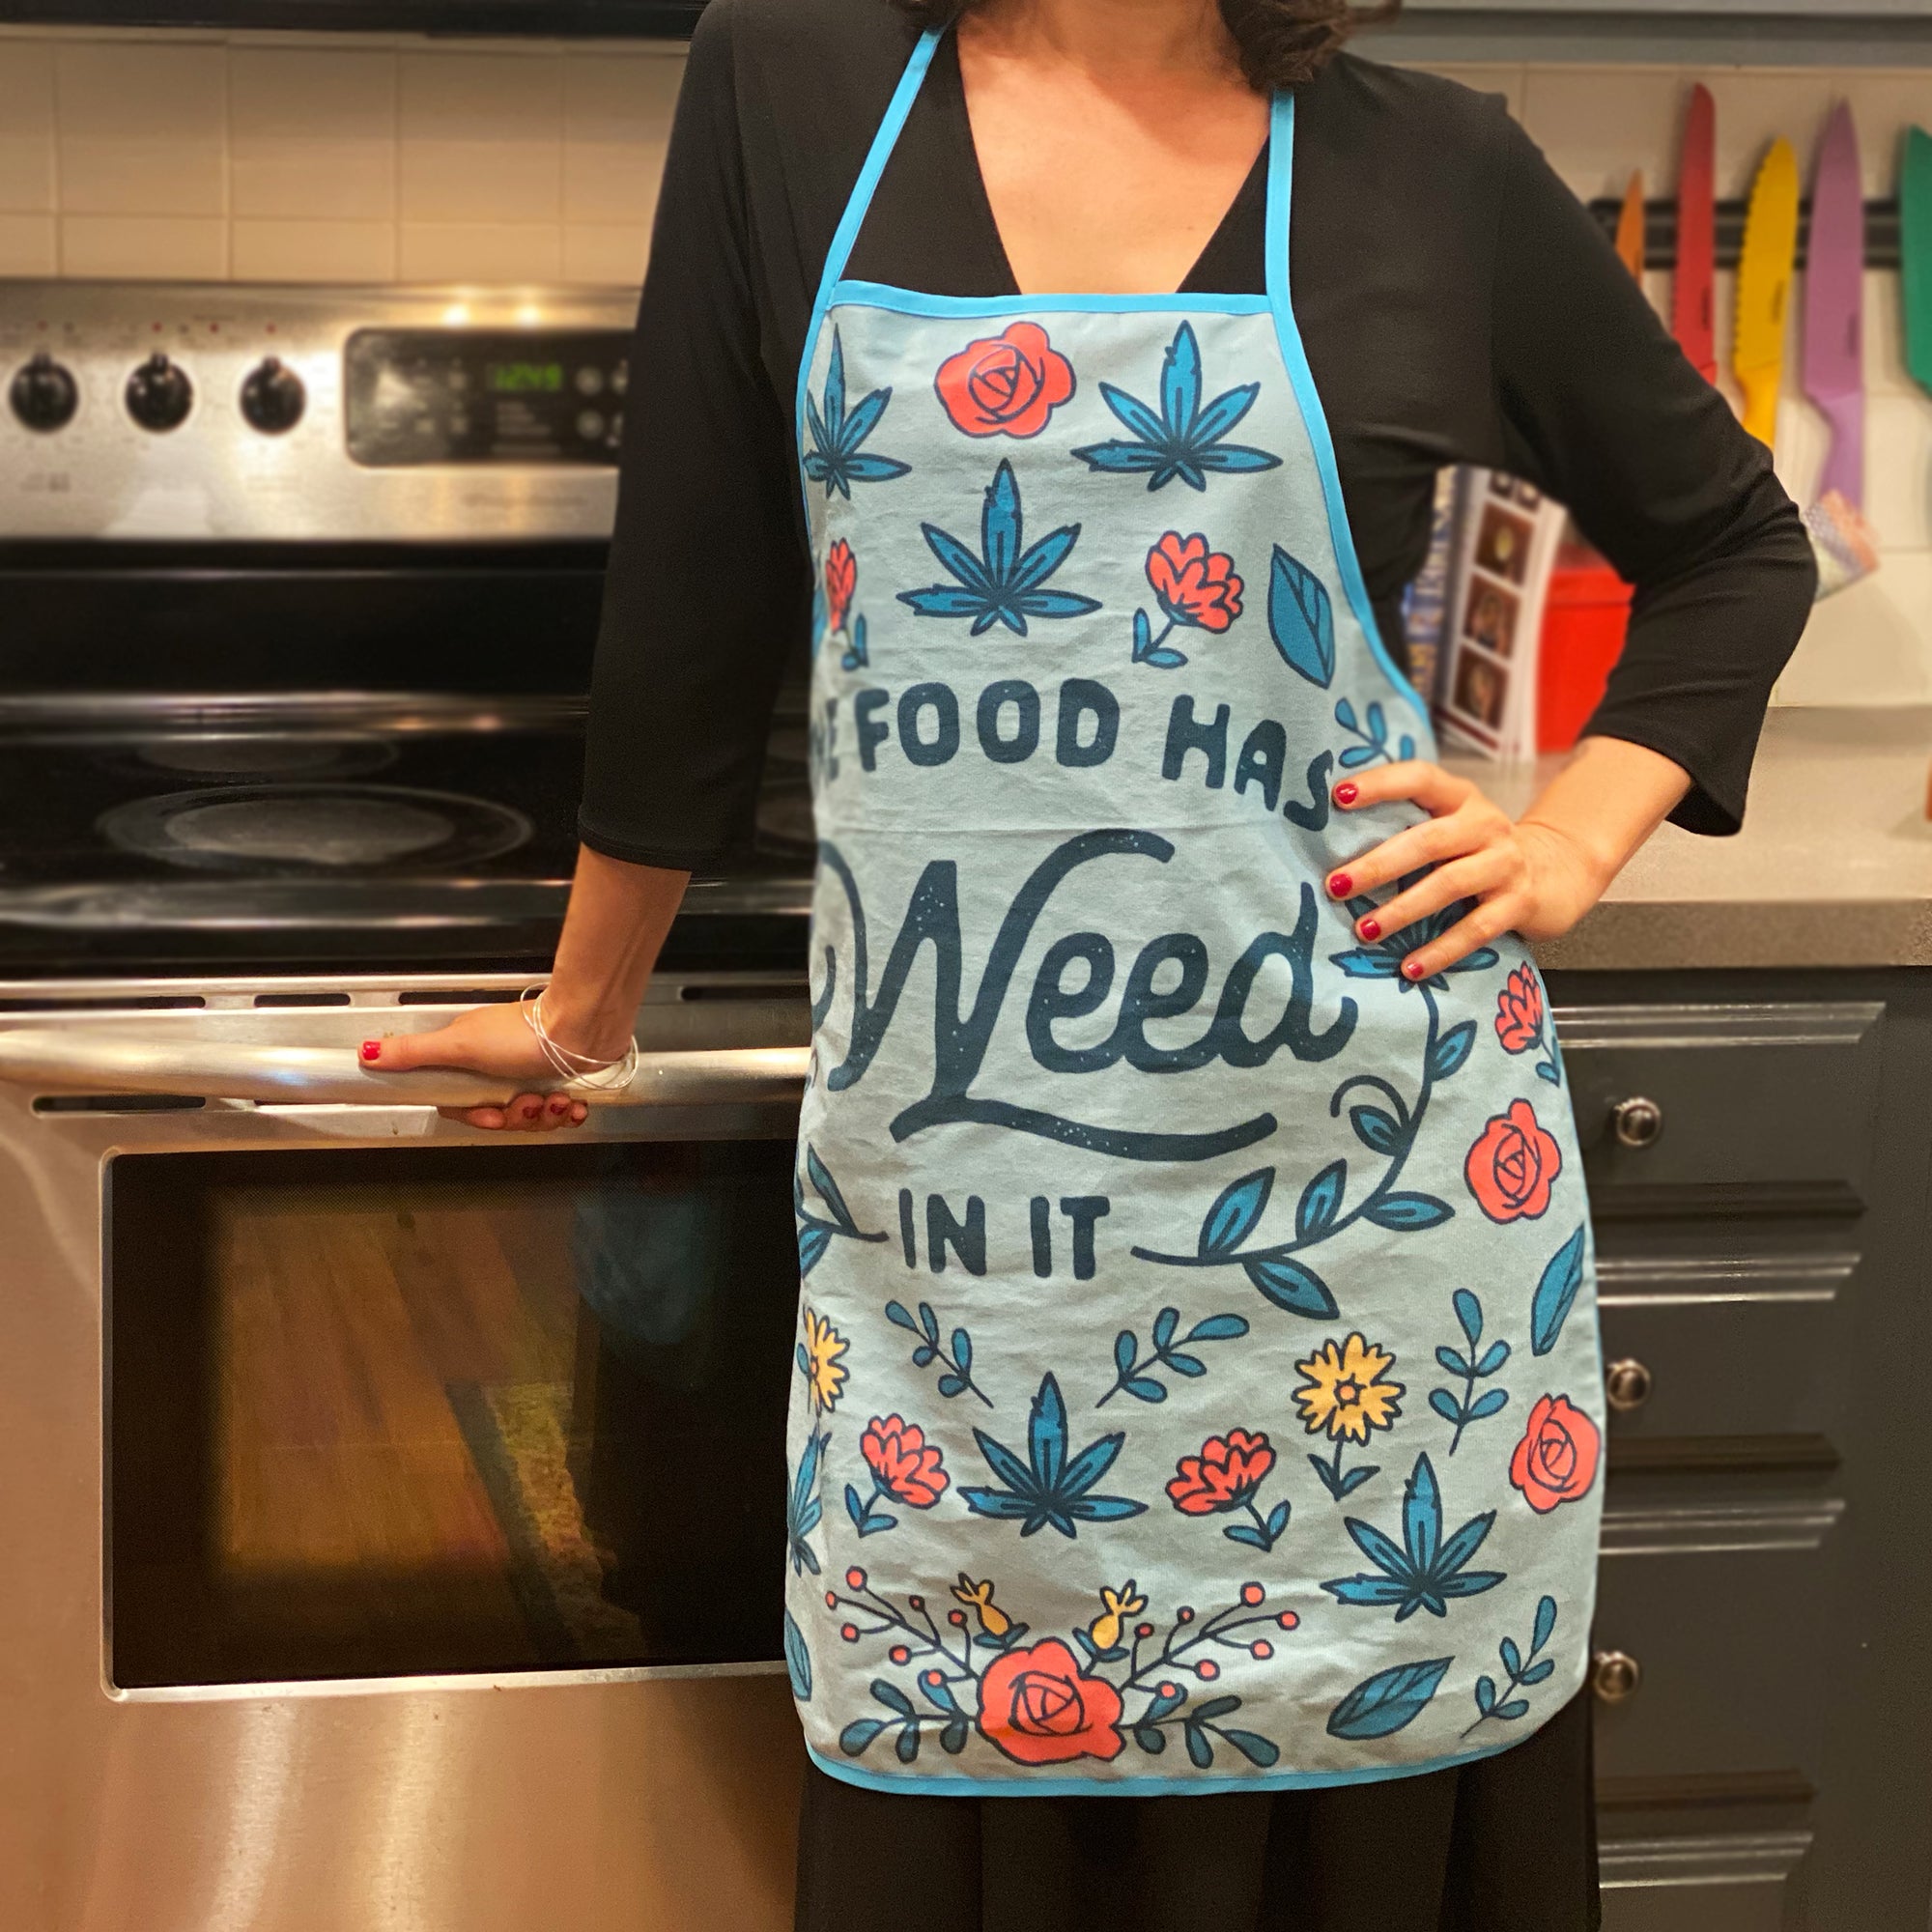 Funny Blue The Food Has Weed In It Oven Mitt + Apron Nerdy 420 Food Tee